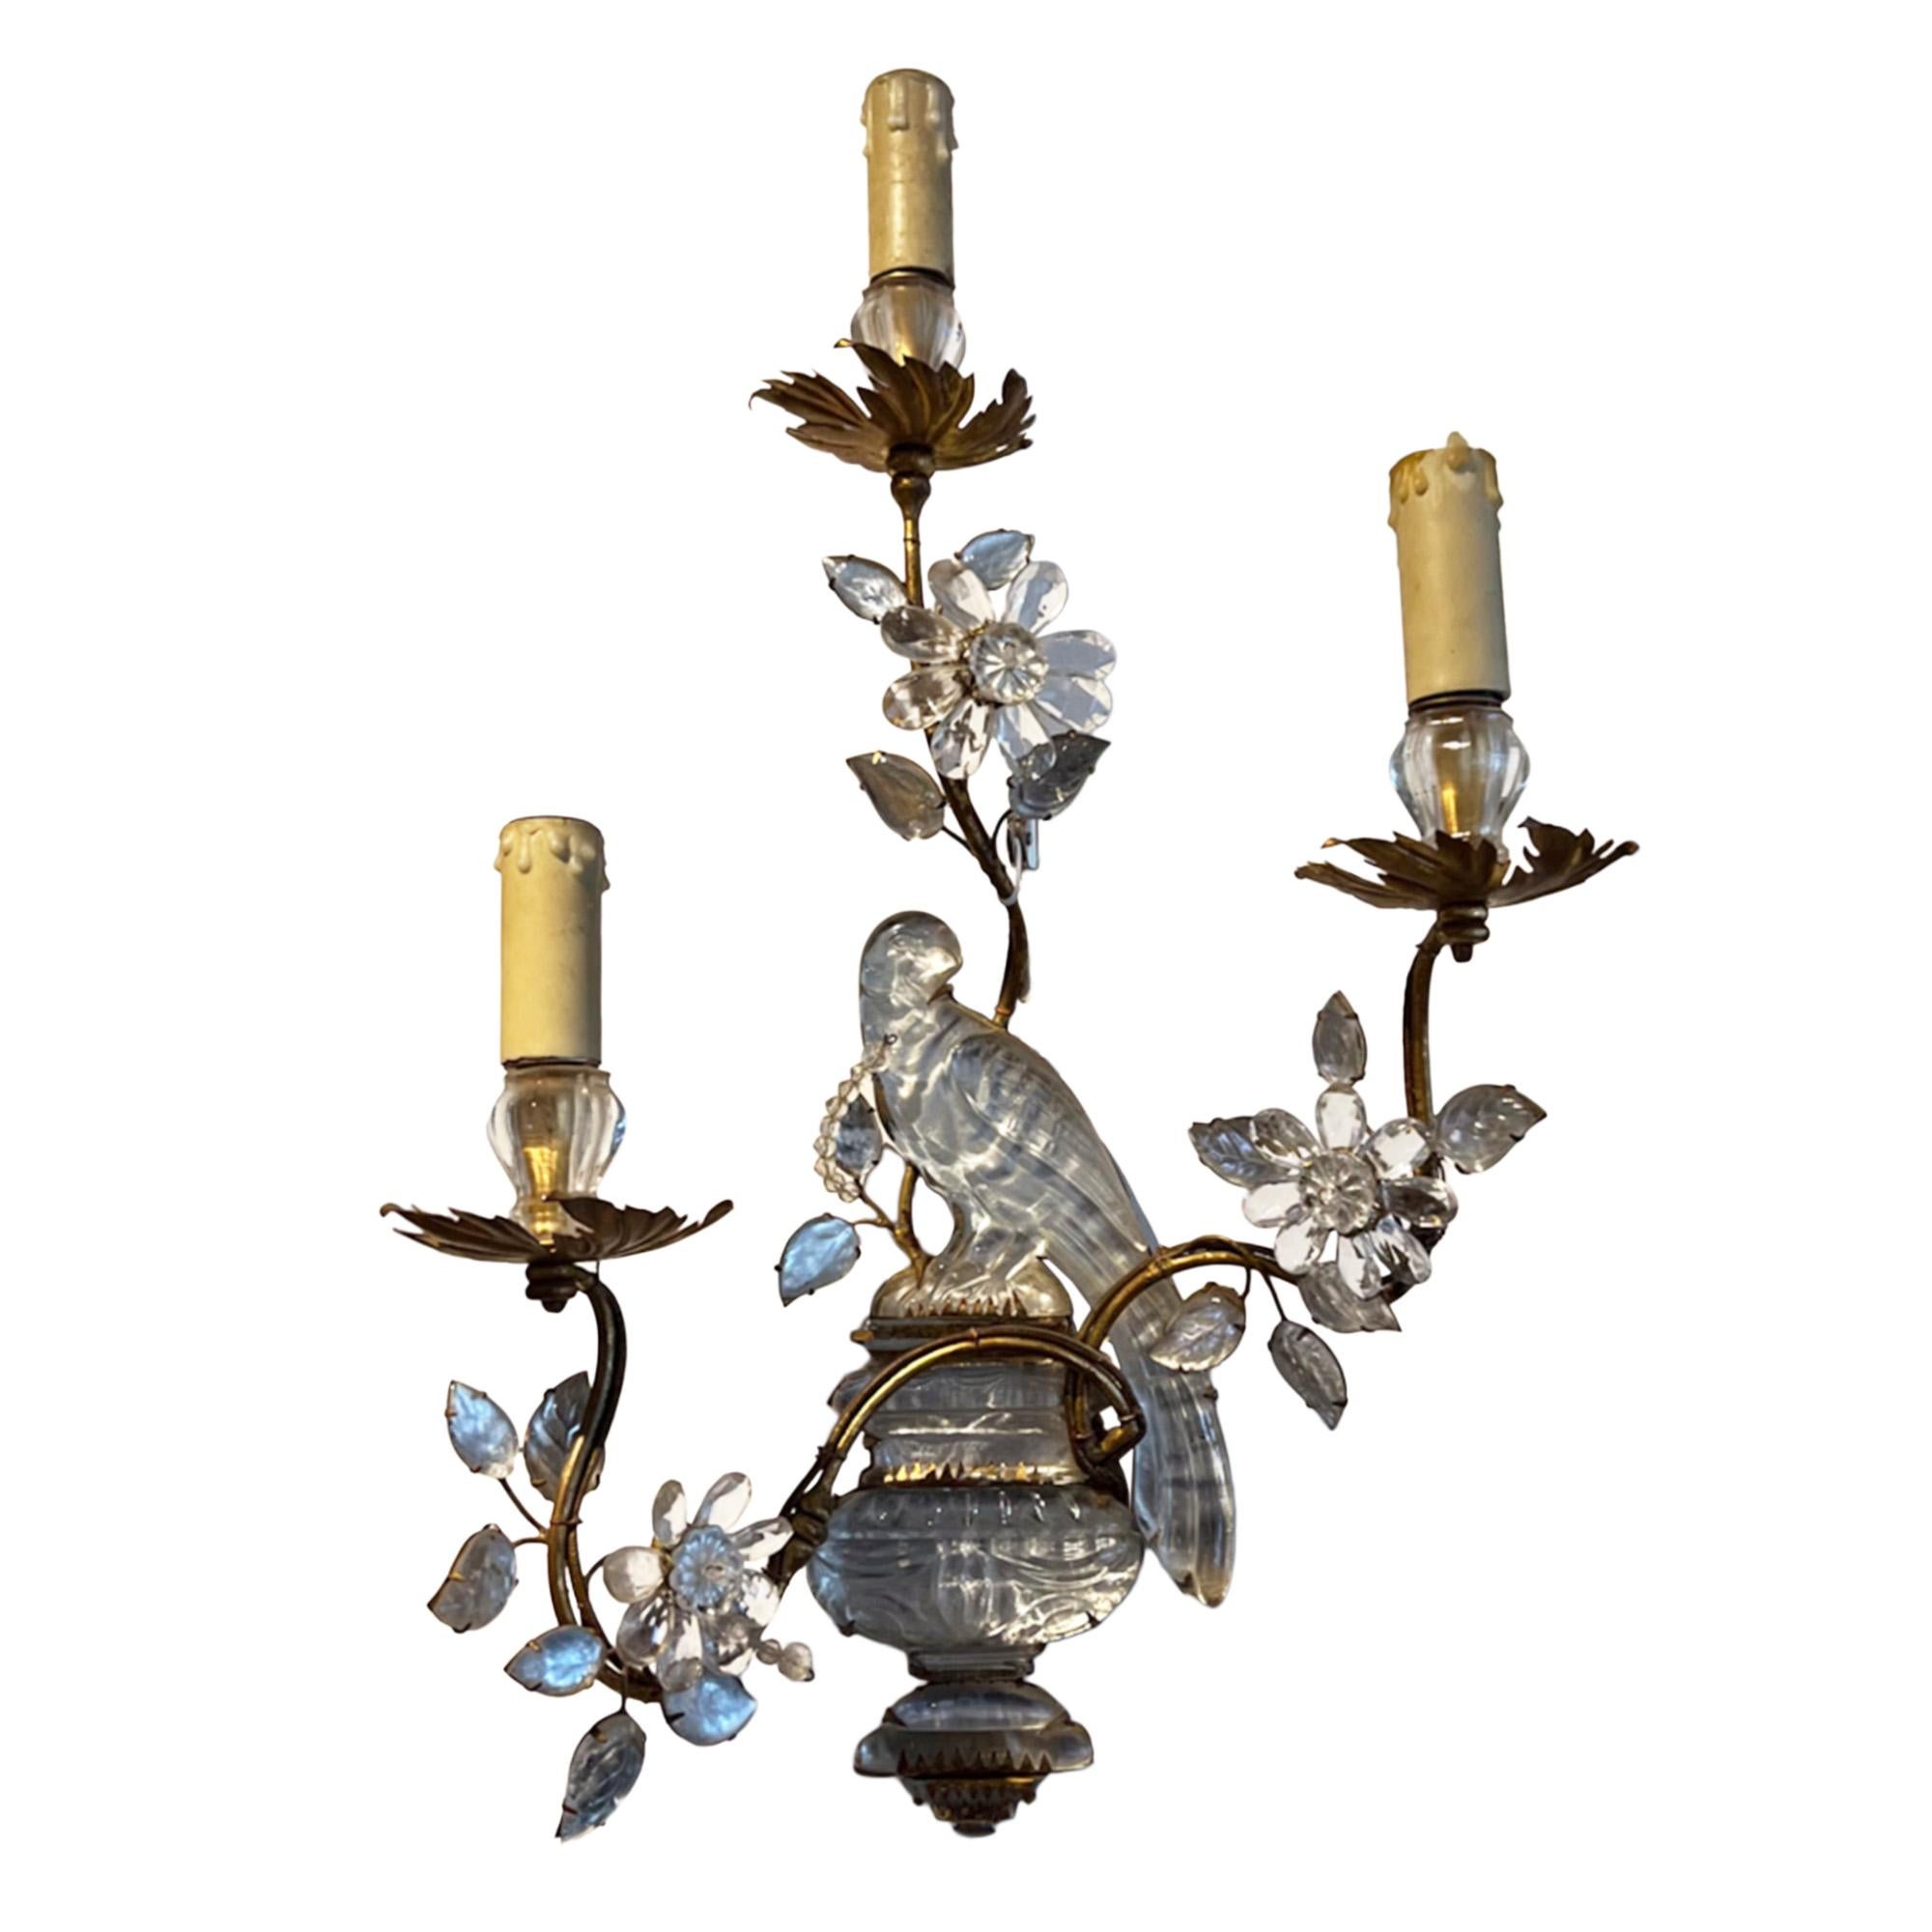 French Provincial Large Pair of Maison Baguès Wall Sconces With Parrot, Urns & 3 Torches For Sale